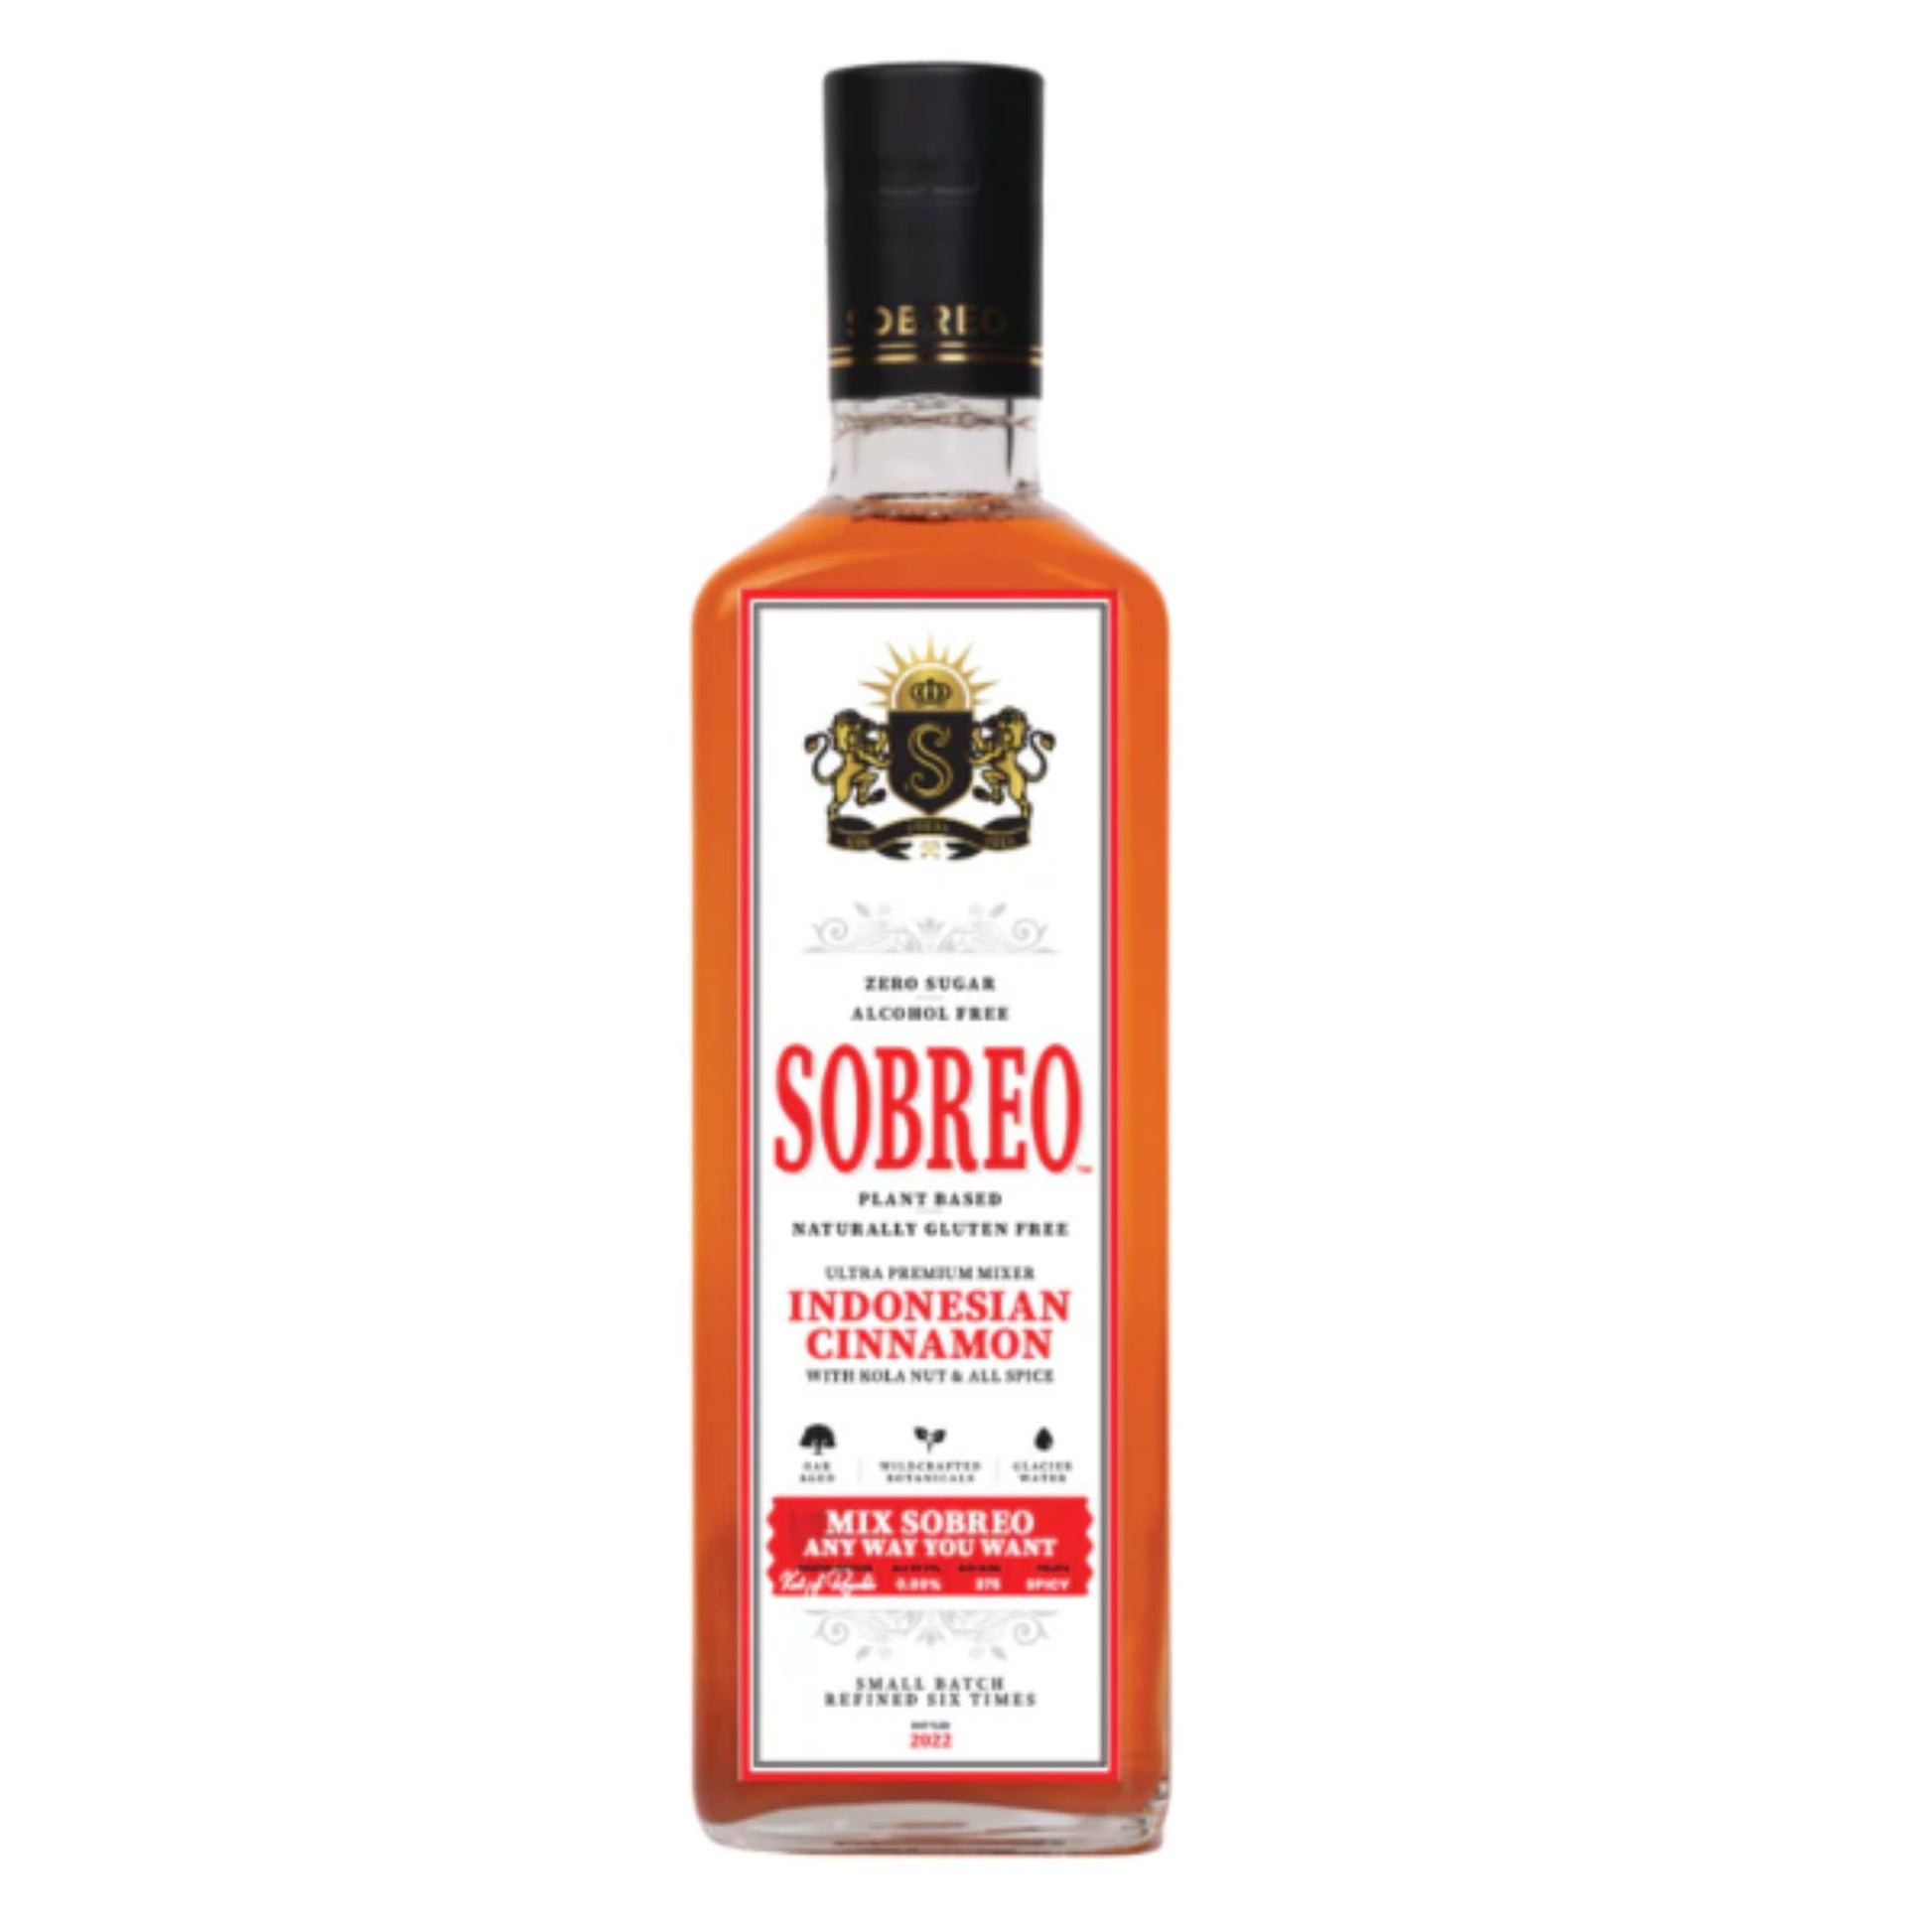 Sobreo Indonesian Cinnamon non-alcoholic cocktail mixer is available for sale at Knyota Drinks.